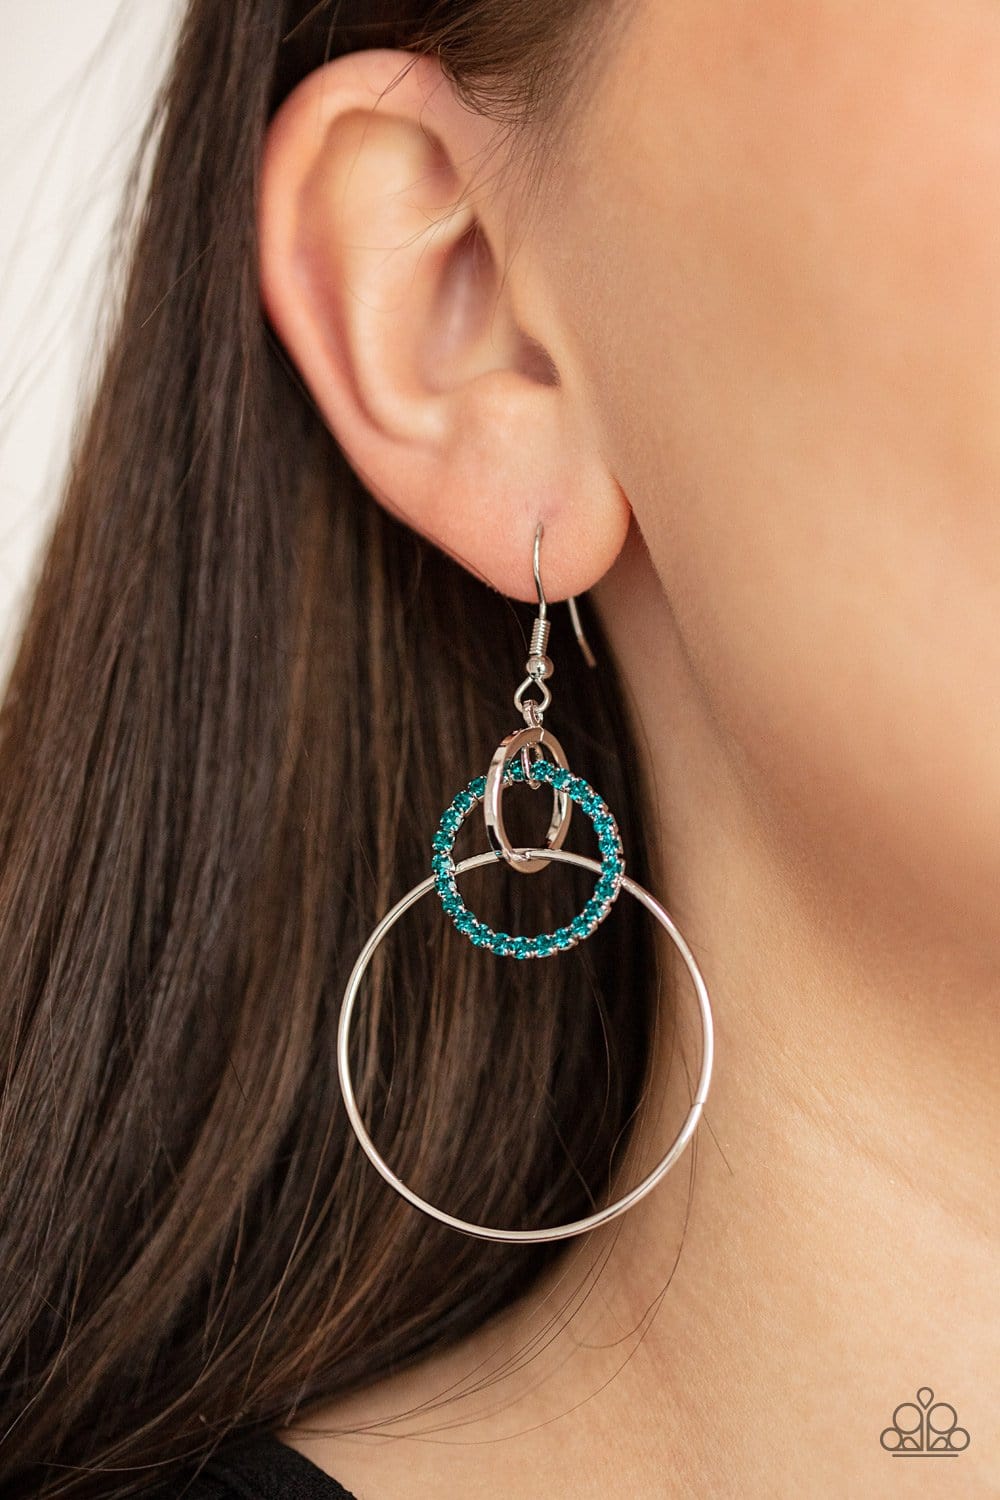 Paparazzi Accessories: In An Orderly Fashion - Blue Earrings - Jewels N Thingz Boutique